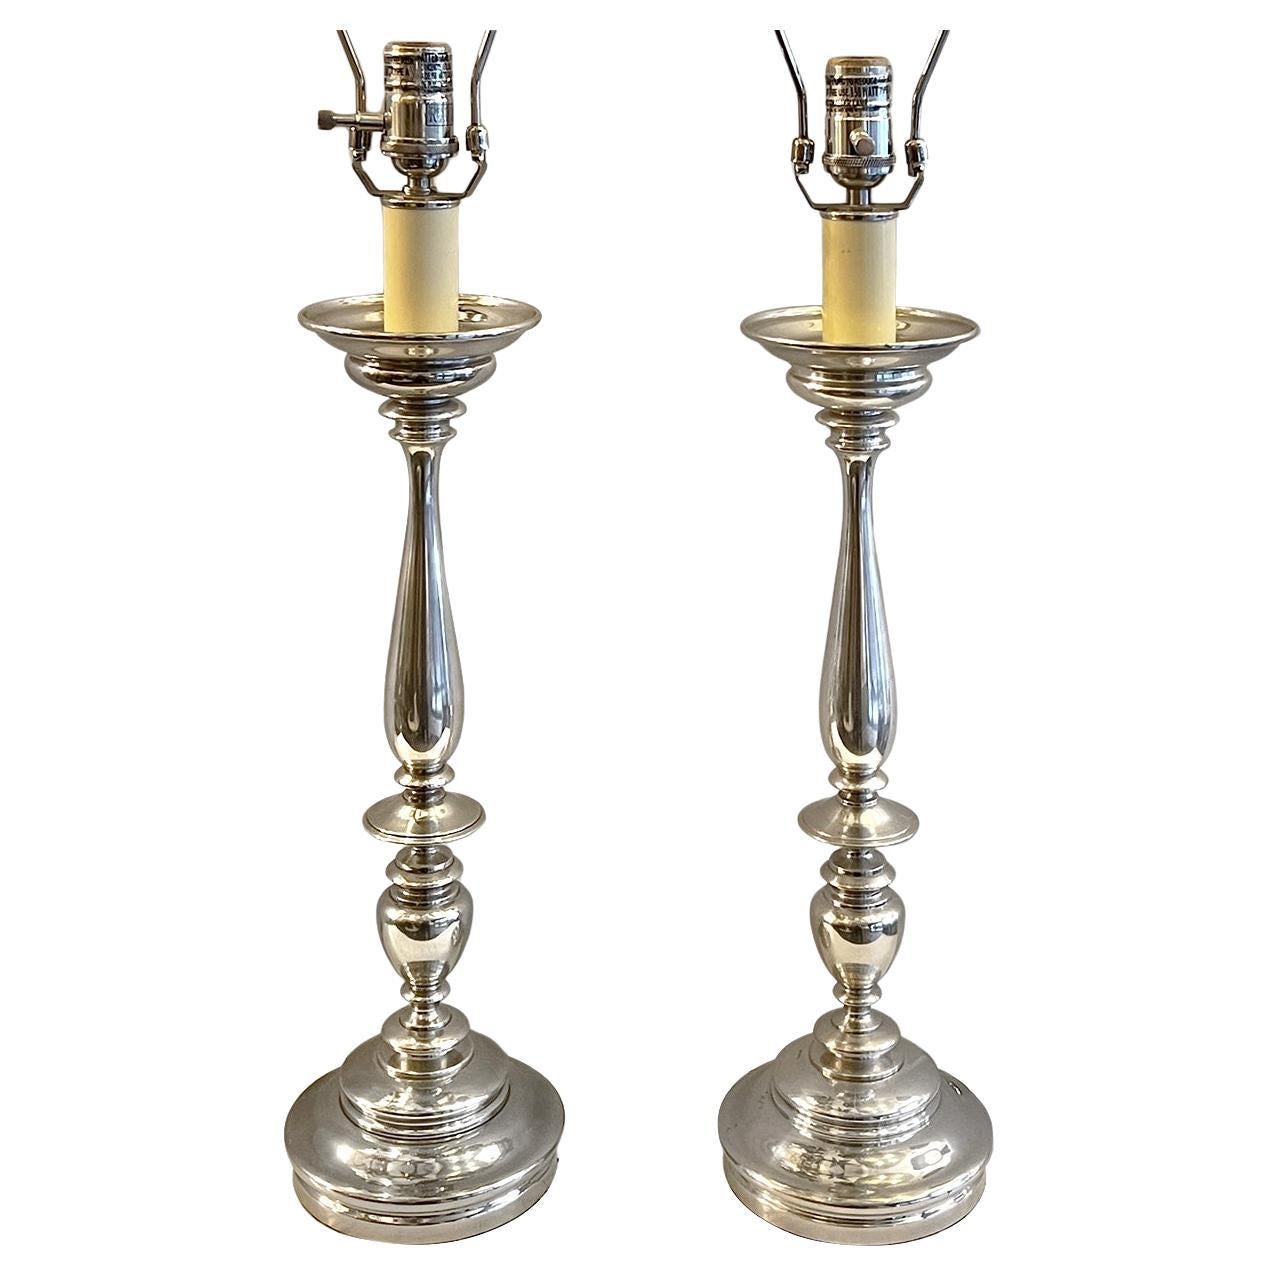 Pair of Silver Plated Candlestick Lamps